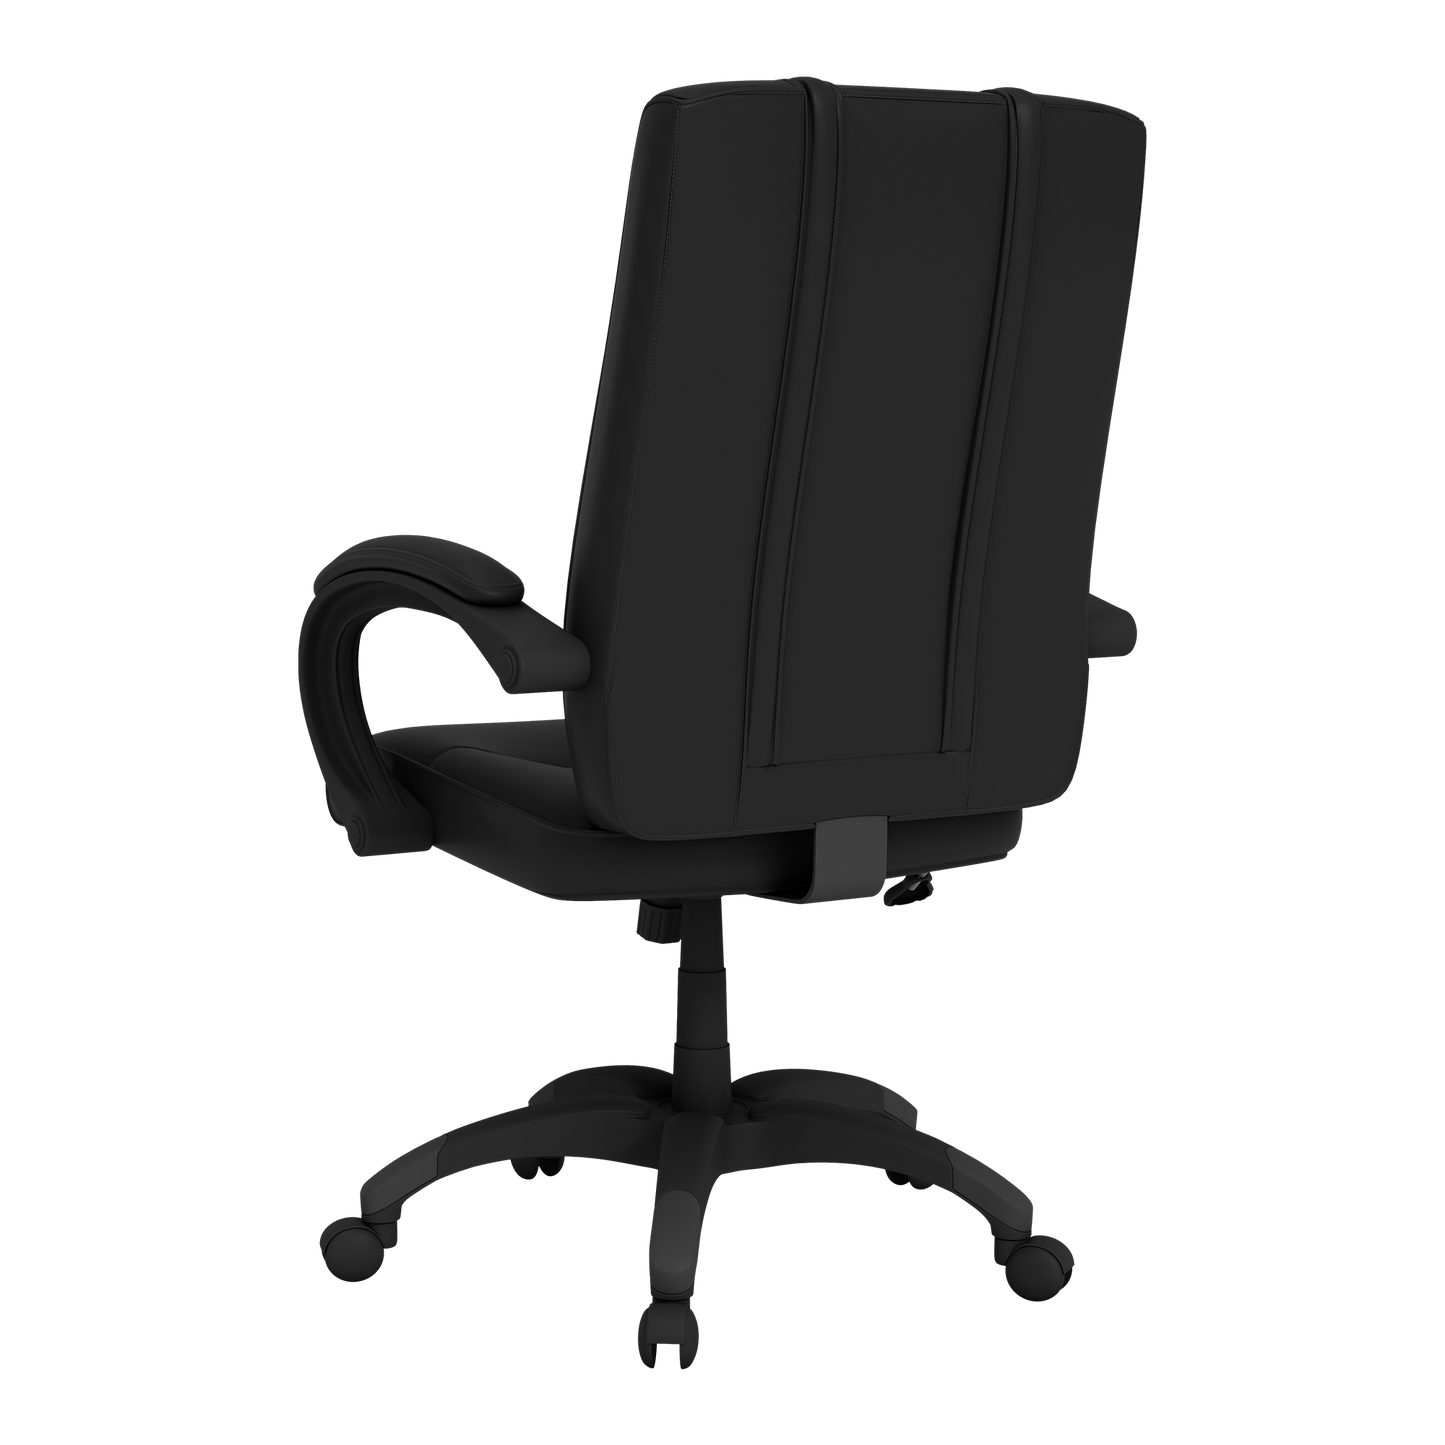 Office Chair 1000 with Northern State Wolf Head Logo Panel